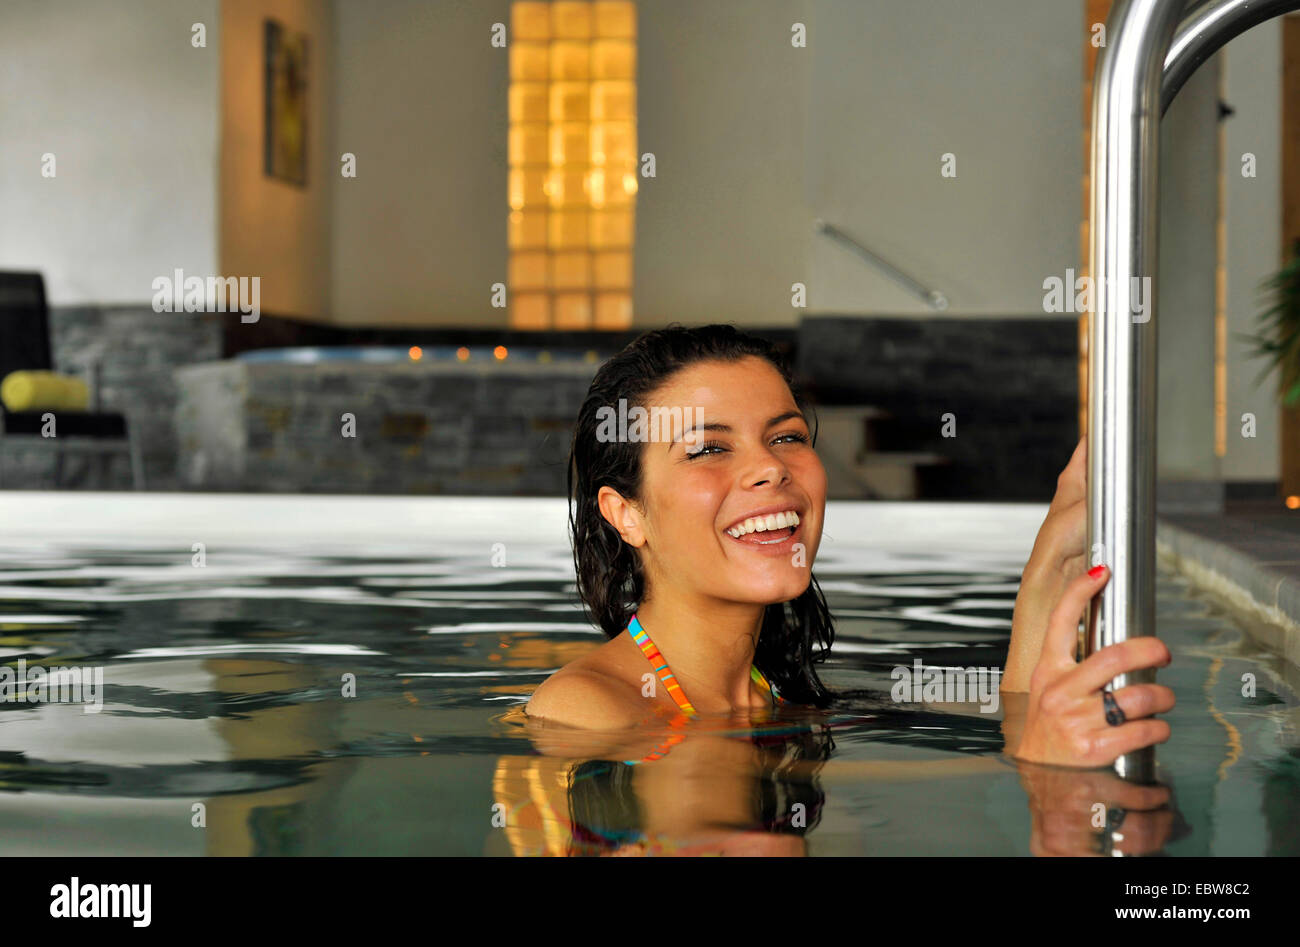 young darkhaired woman in swimming pool Stock Photo